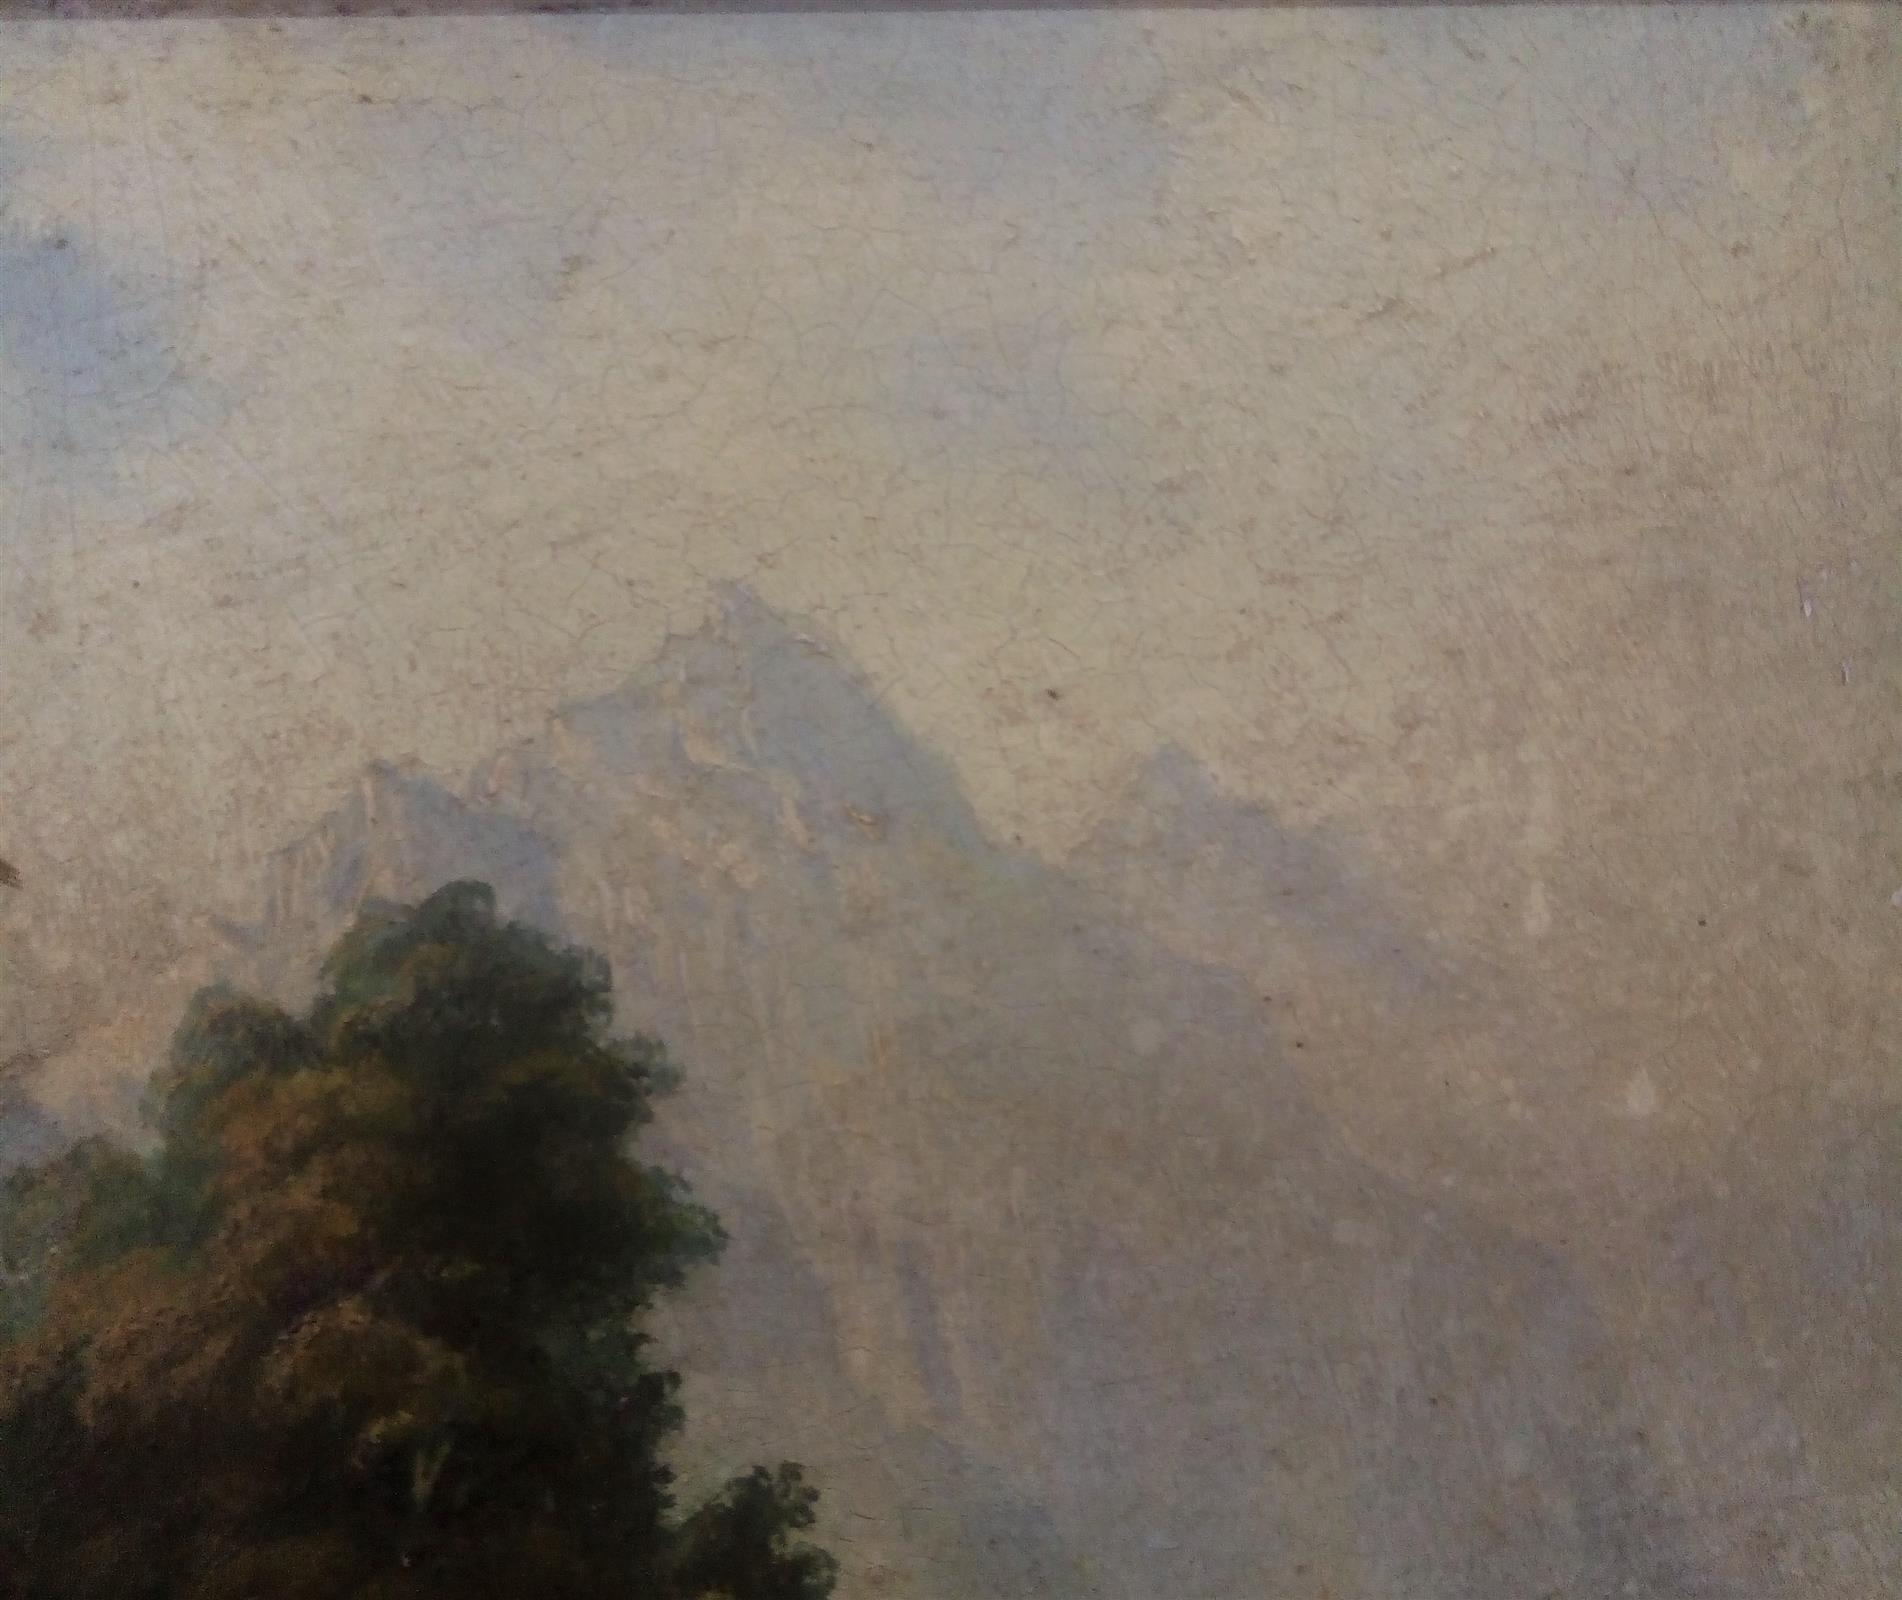 Oil painting of a landscape with a golden frame